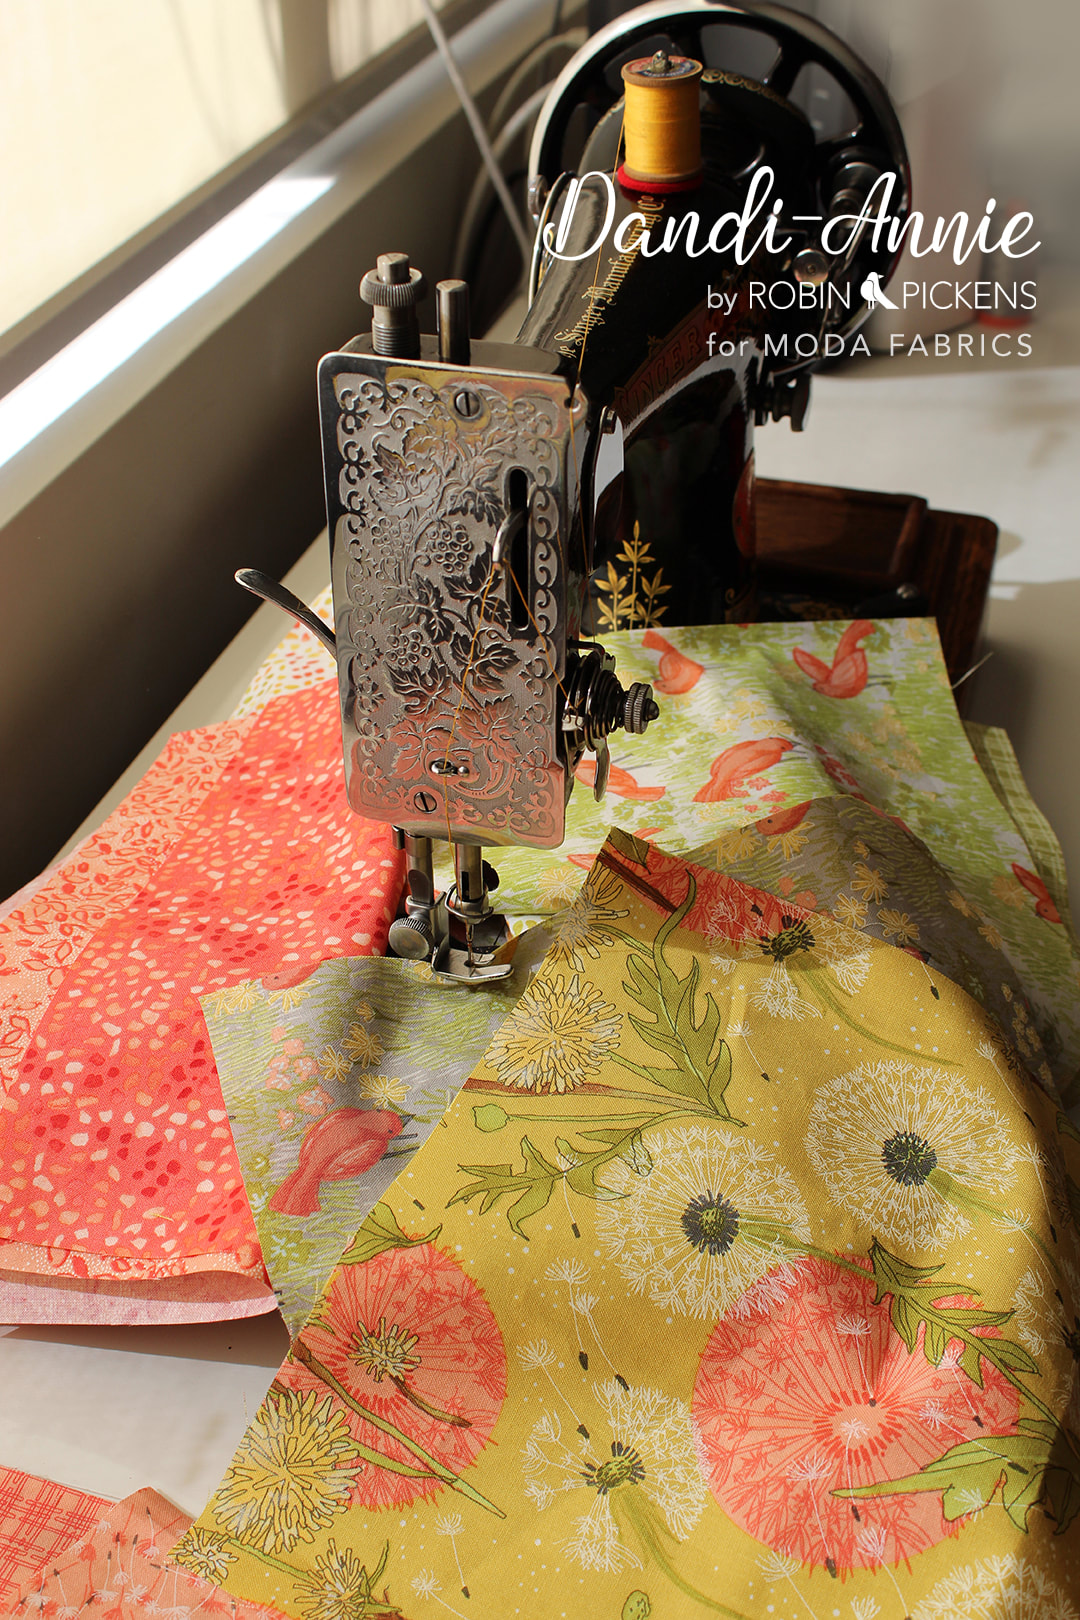 Dandi Annie fabric for Moda by Robin Pickens with dandelion and birds with vintage singer sewing machine.